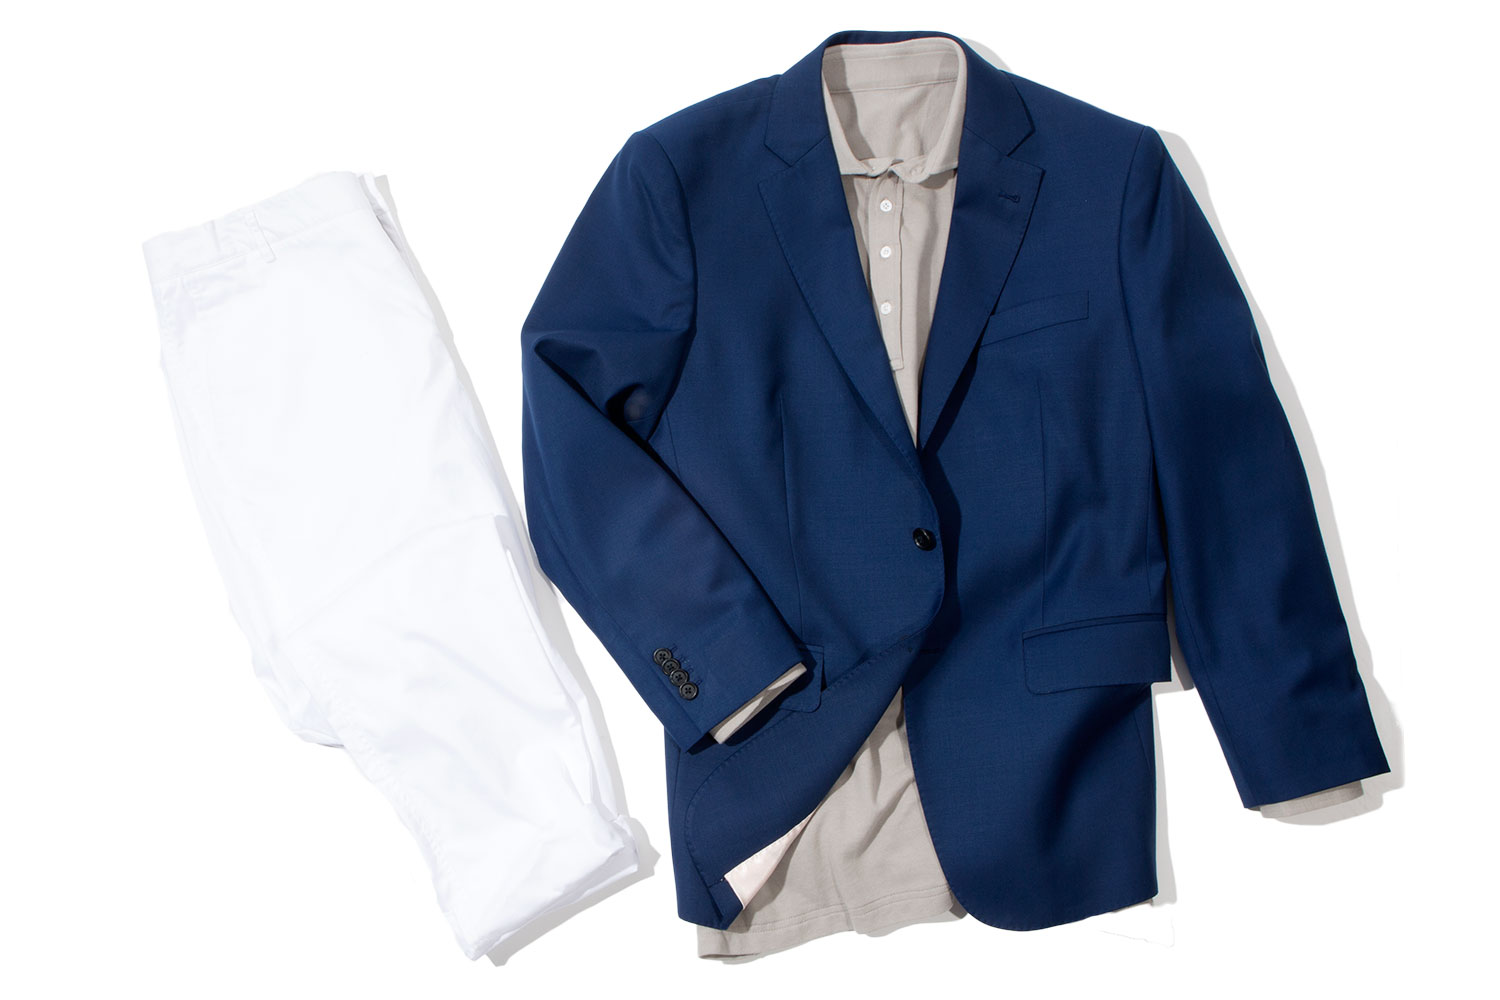 jackets to wear with polo shirts